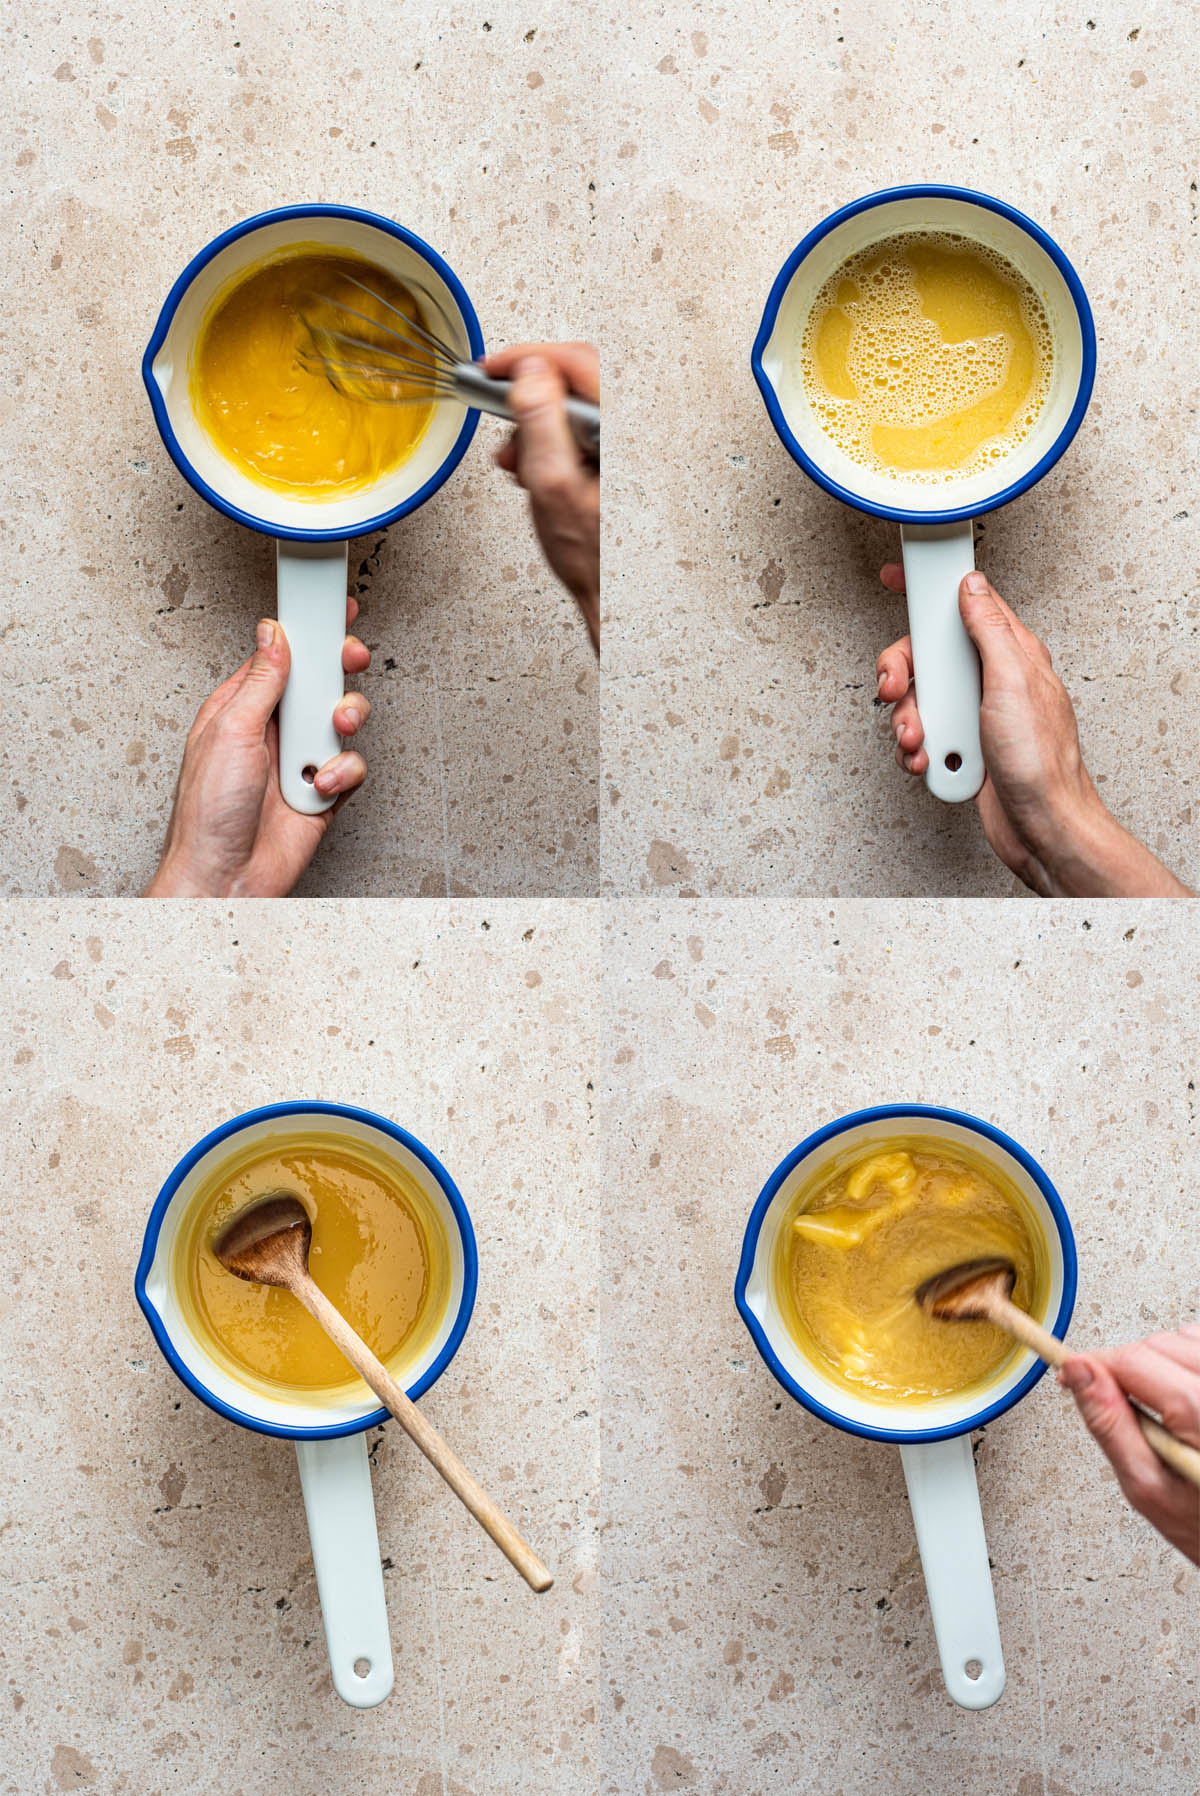 Steps for making lemon curd. Whisking egg yolks and honey, showing thickened curd, and whisking nondairy butter in.